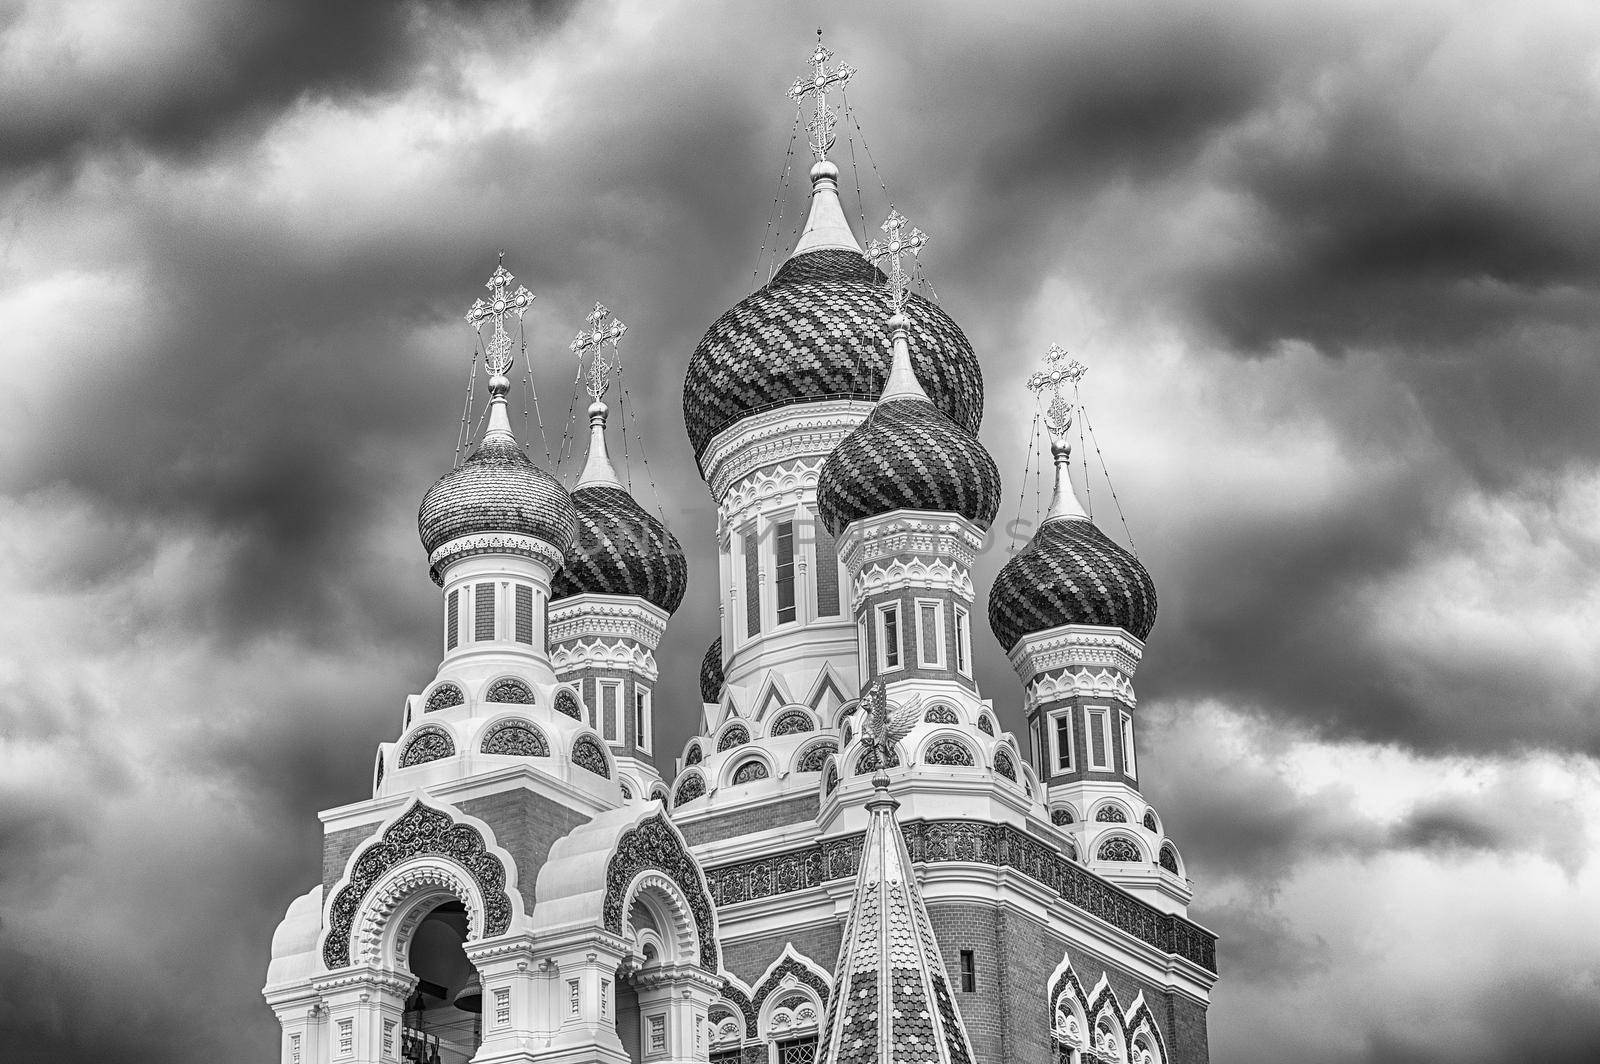 The iconic St Nicholas Orthodox Cathedral, Nice, Cote d'Azur, France by marcorubino